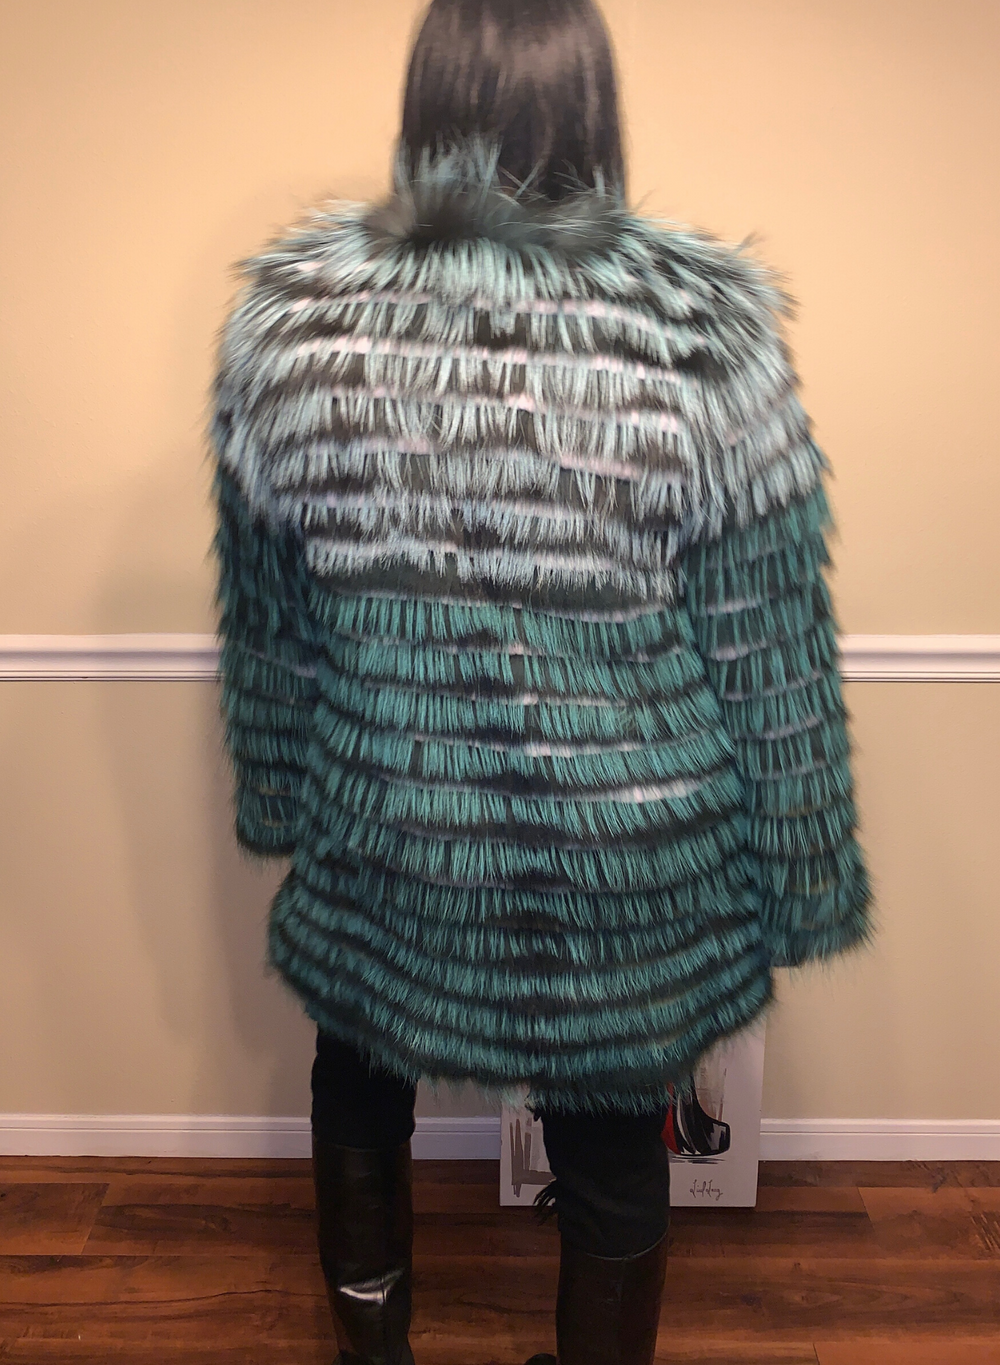 Size M. Green Sheared Silver Fox Jacket with Rex Rabbit (white) inserts